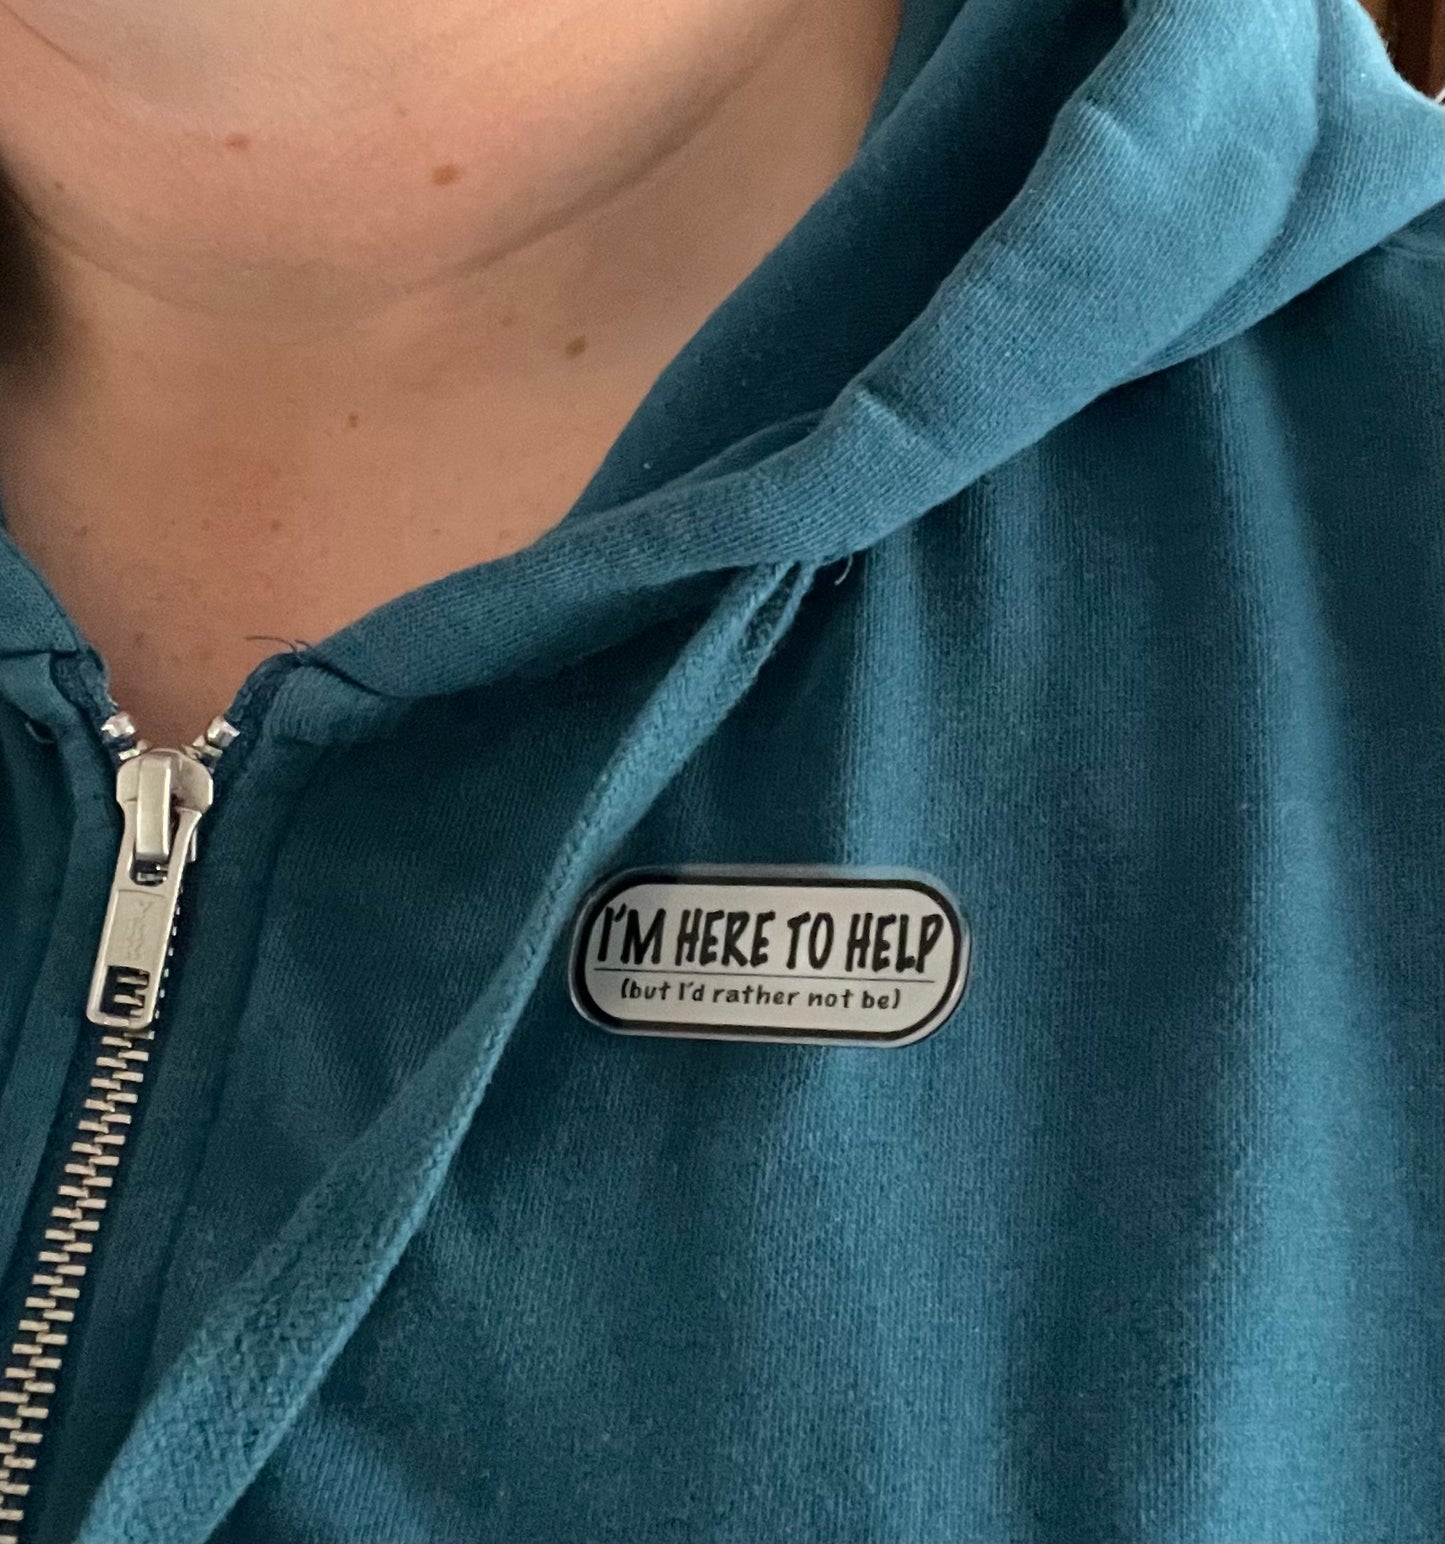 “I’m here to help, but I’d rather not be” Pin